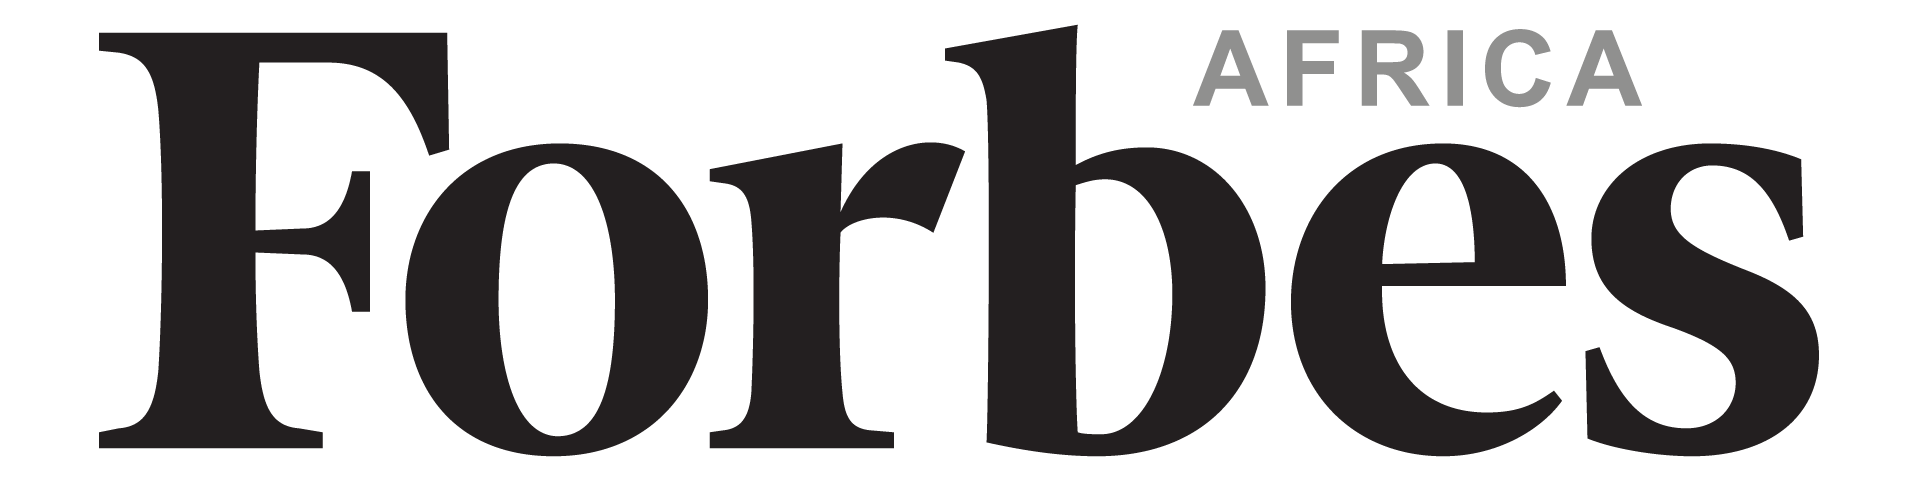 Forbes Africa - Media - Publishers